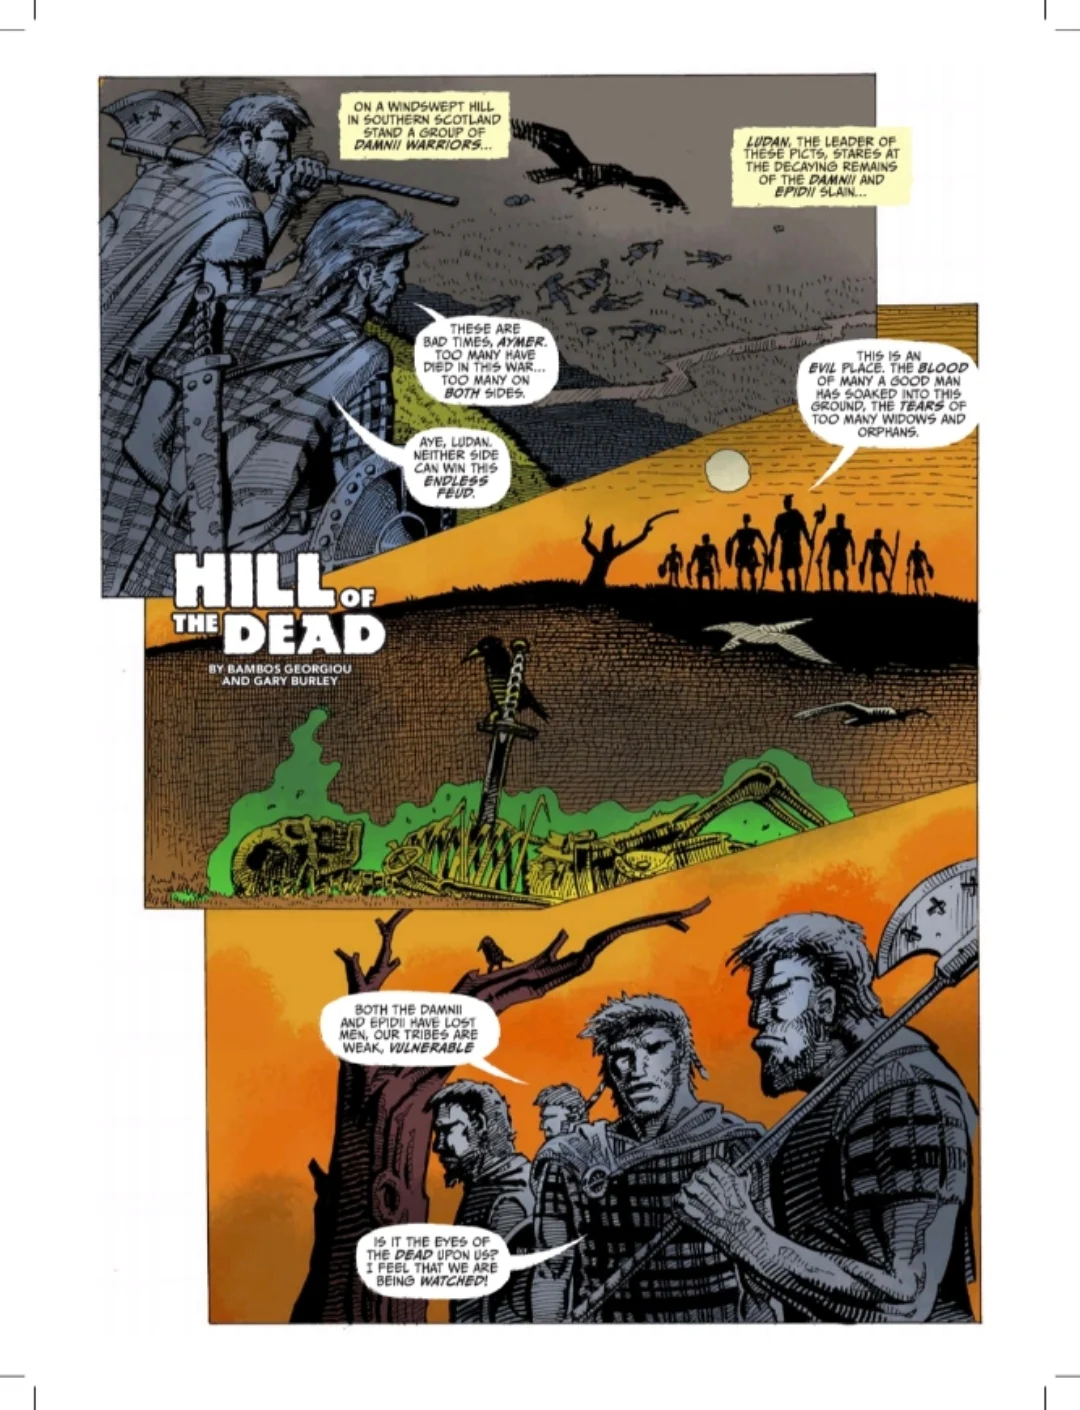 The Hill Of The Dead main credits page